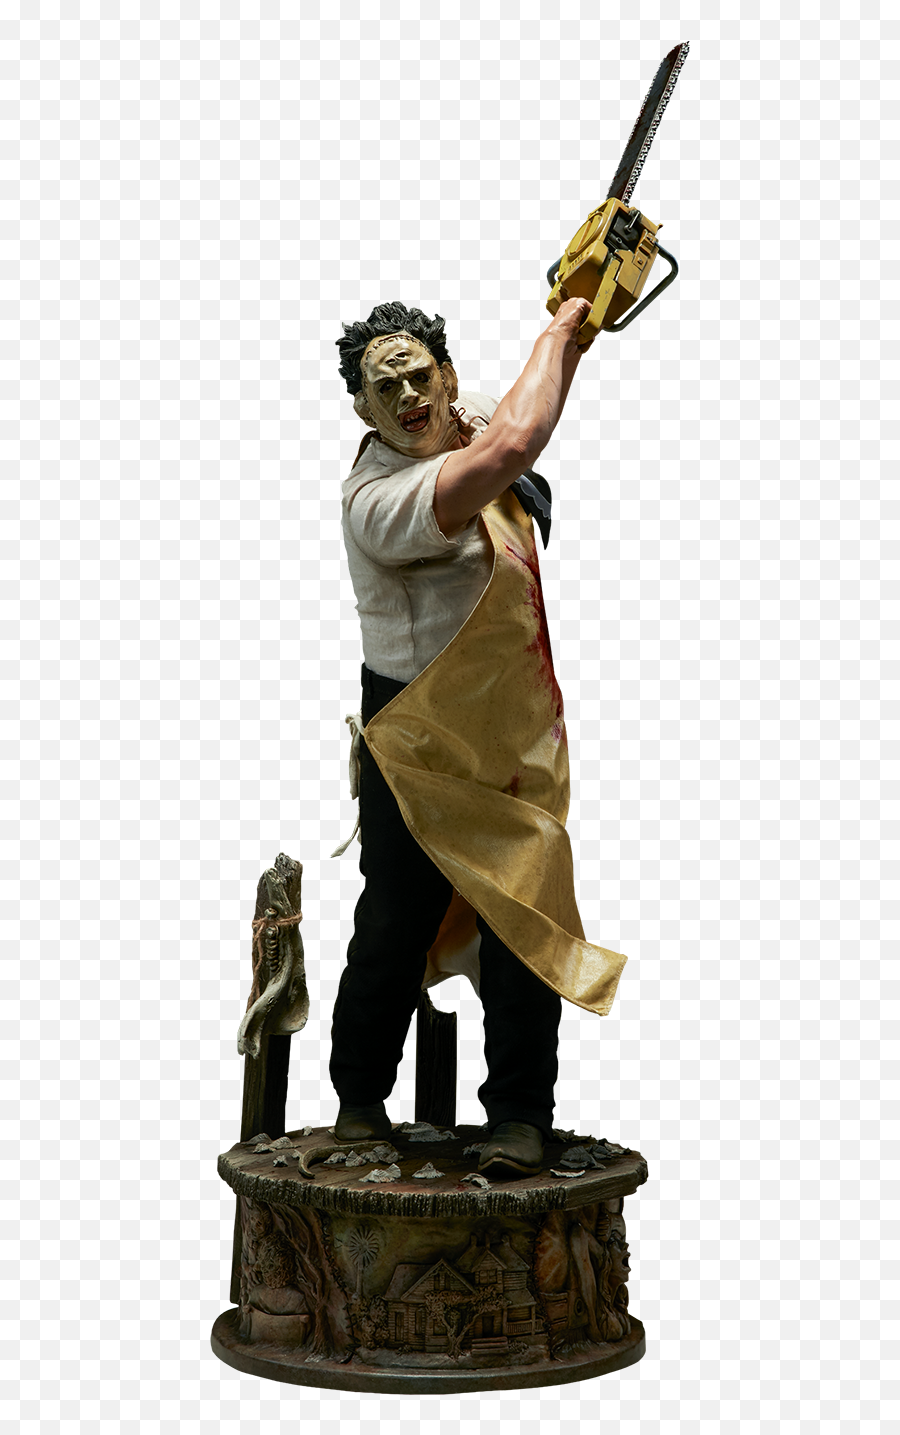 Leatherface - Texas Chainsaw Massacre Png,Leatherface Png